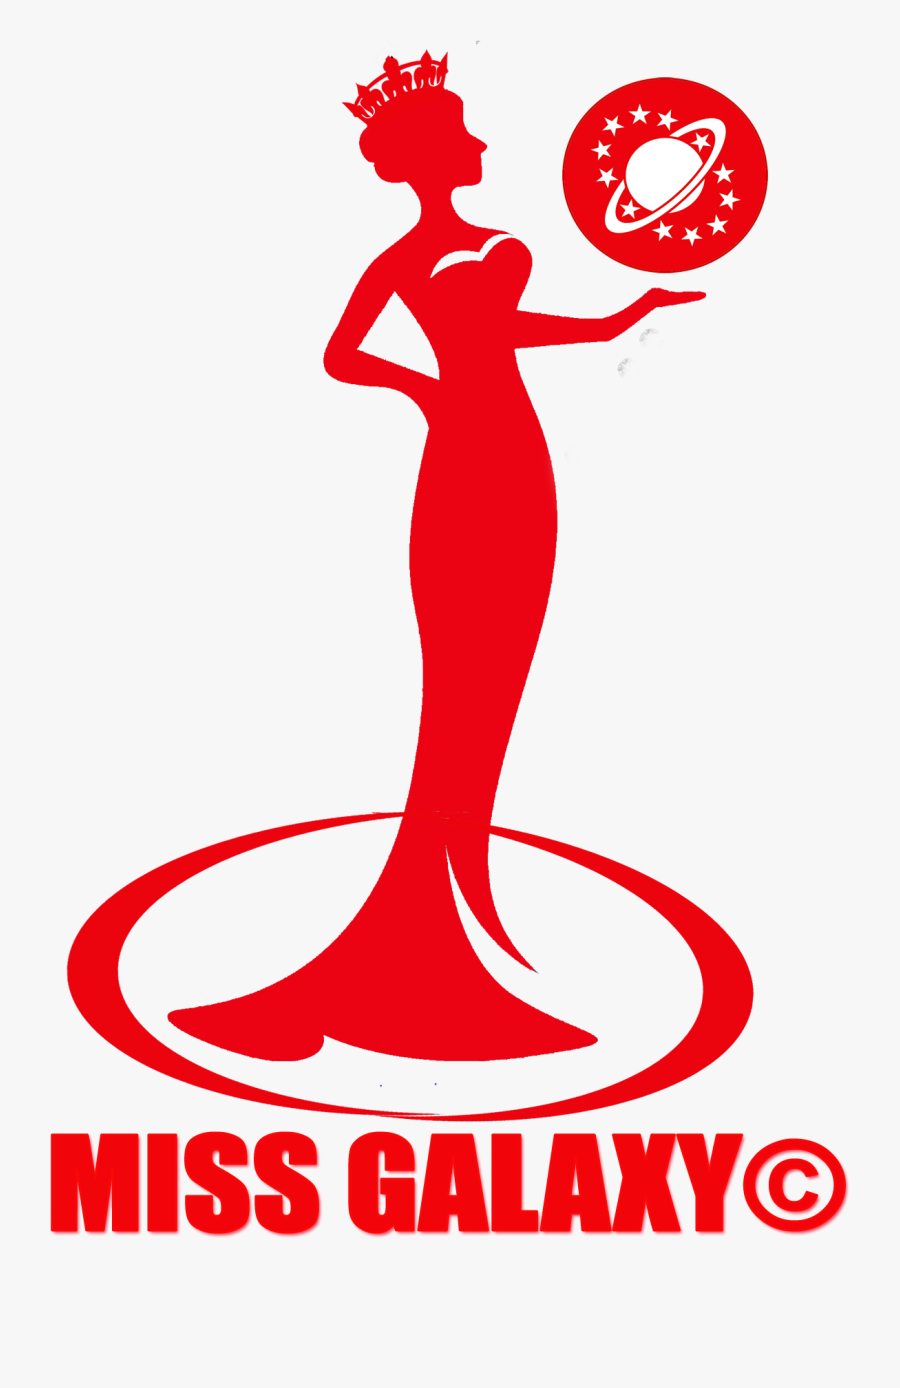 Miss Universe Beauty Pageant Binibining Pilipinas Miss - Beauty Queen Silhouette Png, Transparent Clipart